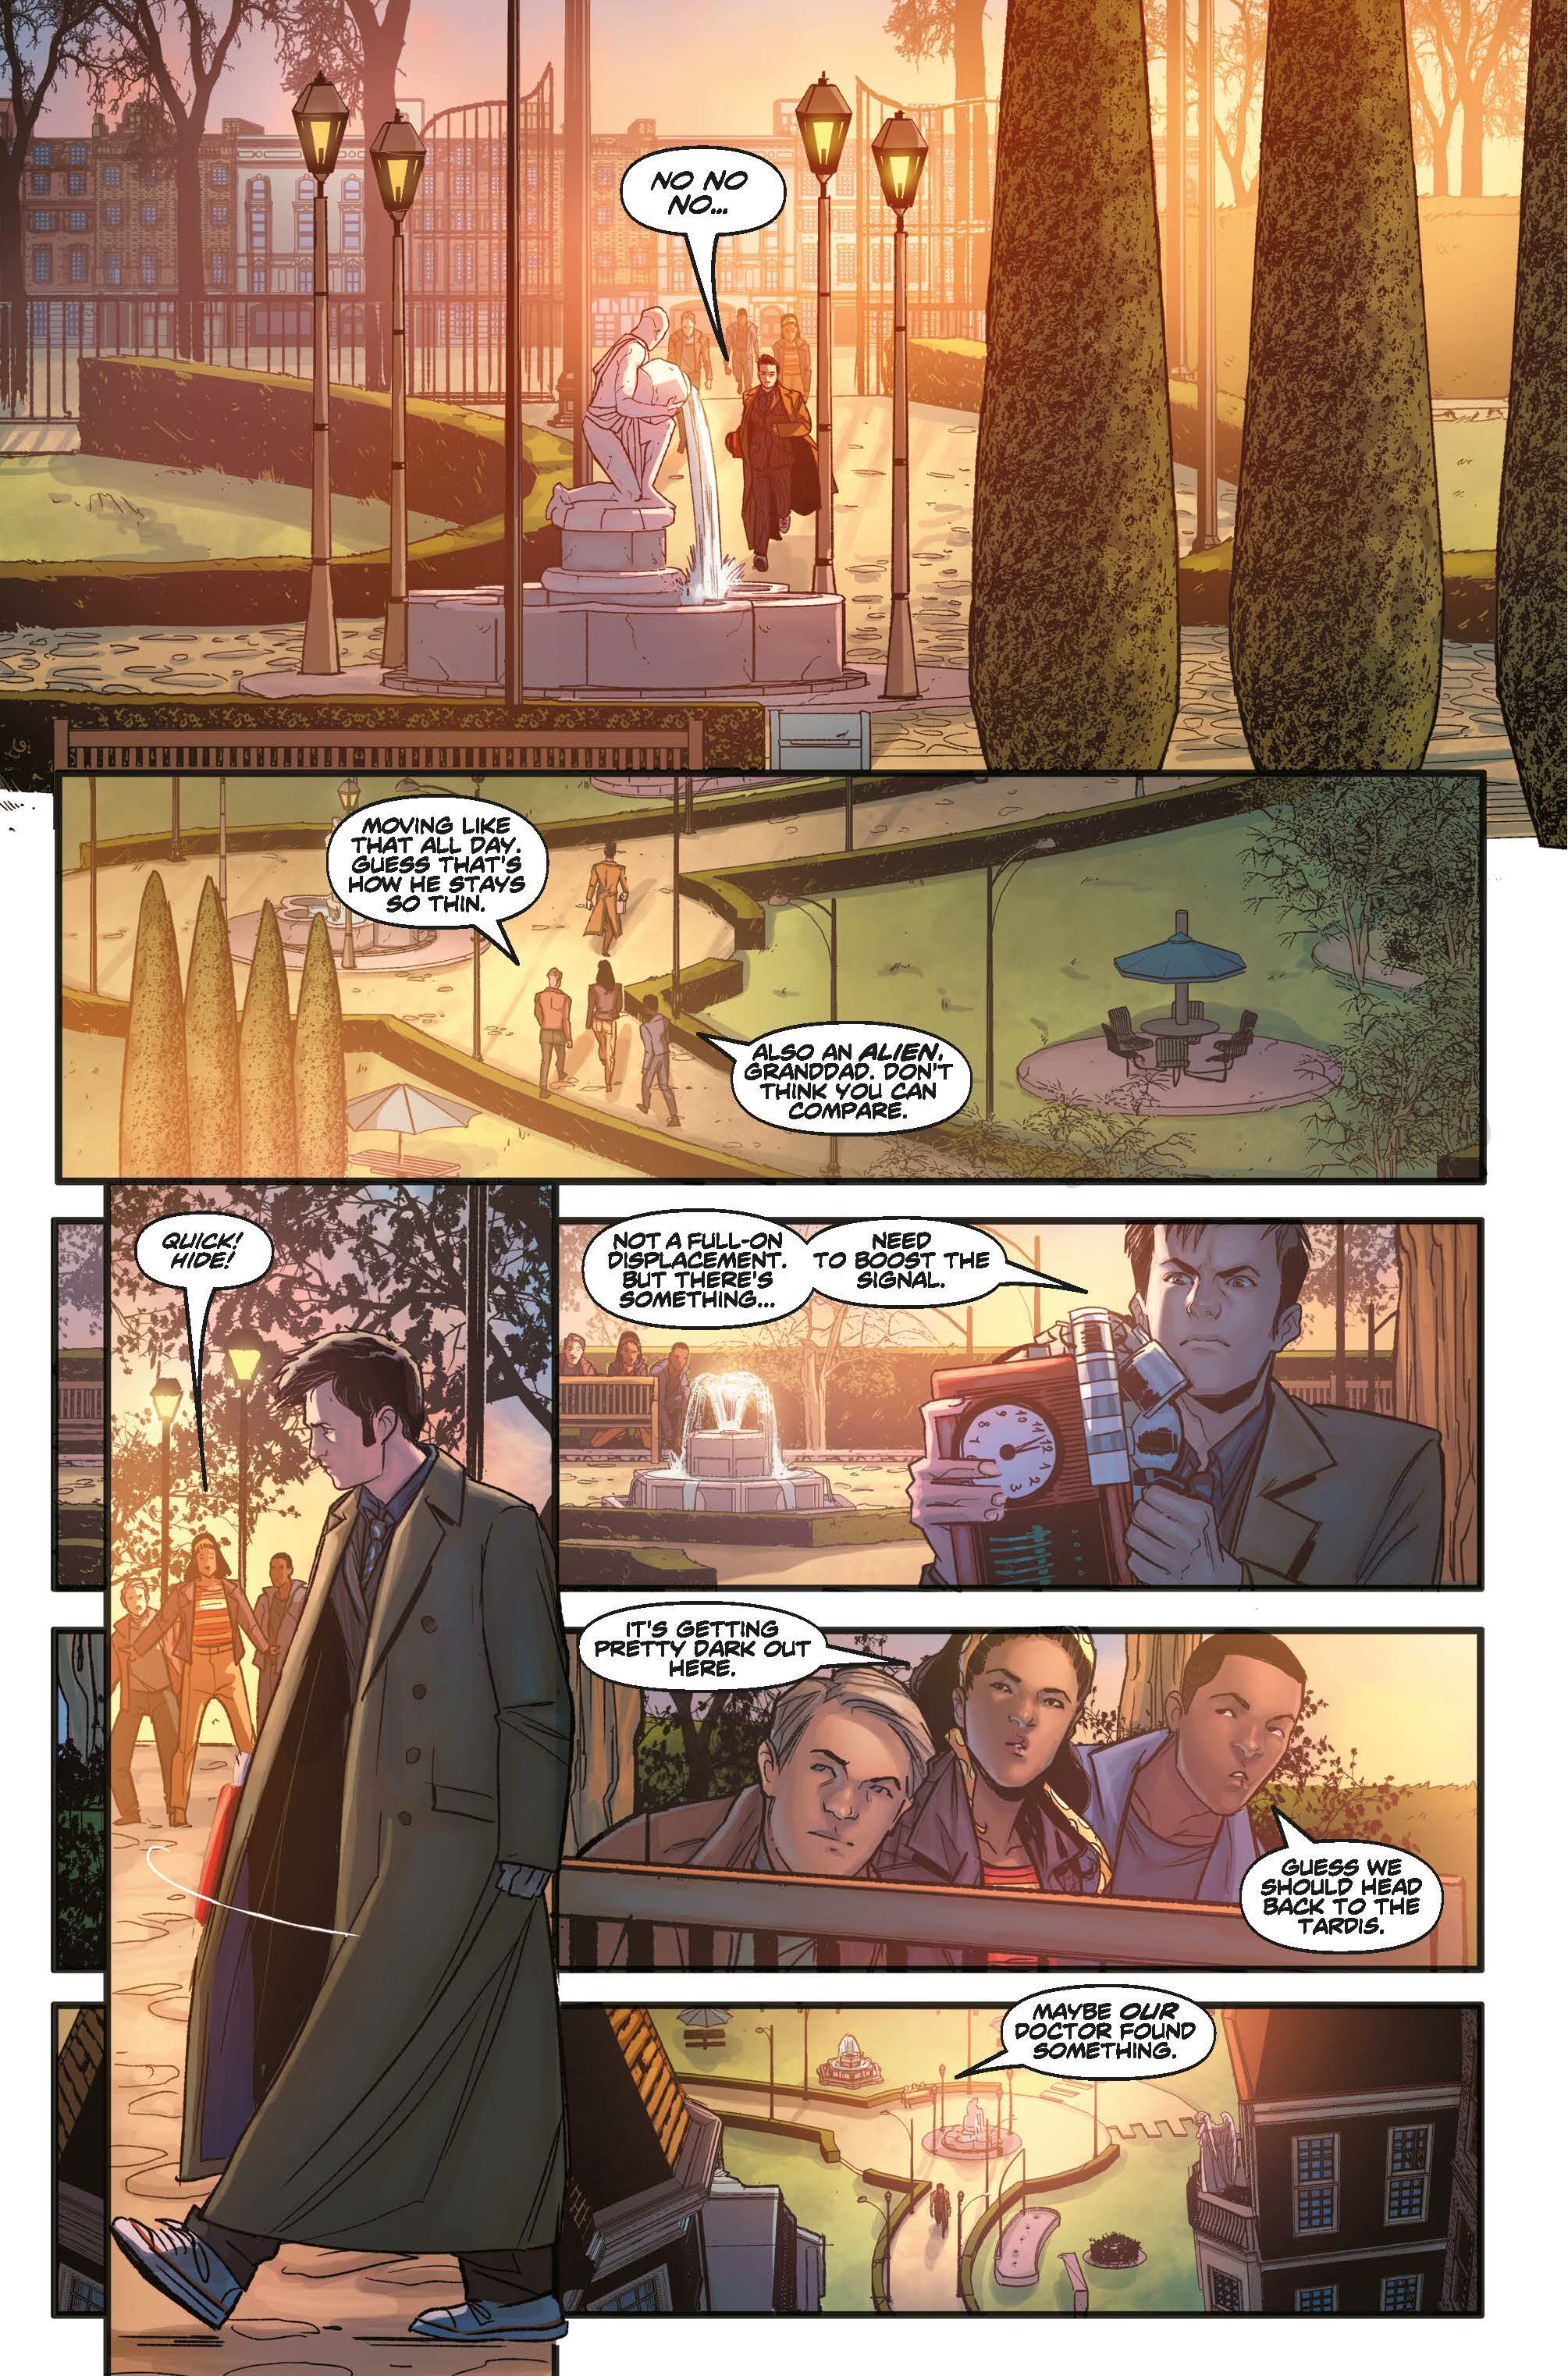 DW13DY2_1 Extended Art_Page2